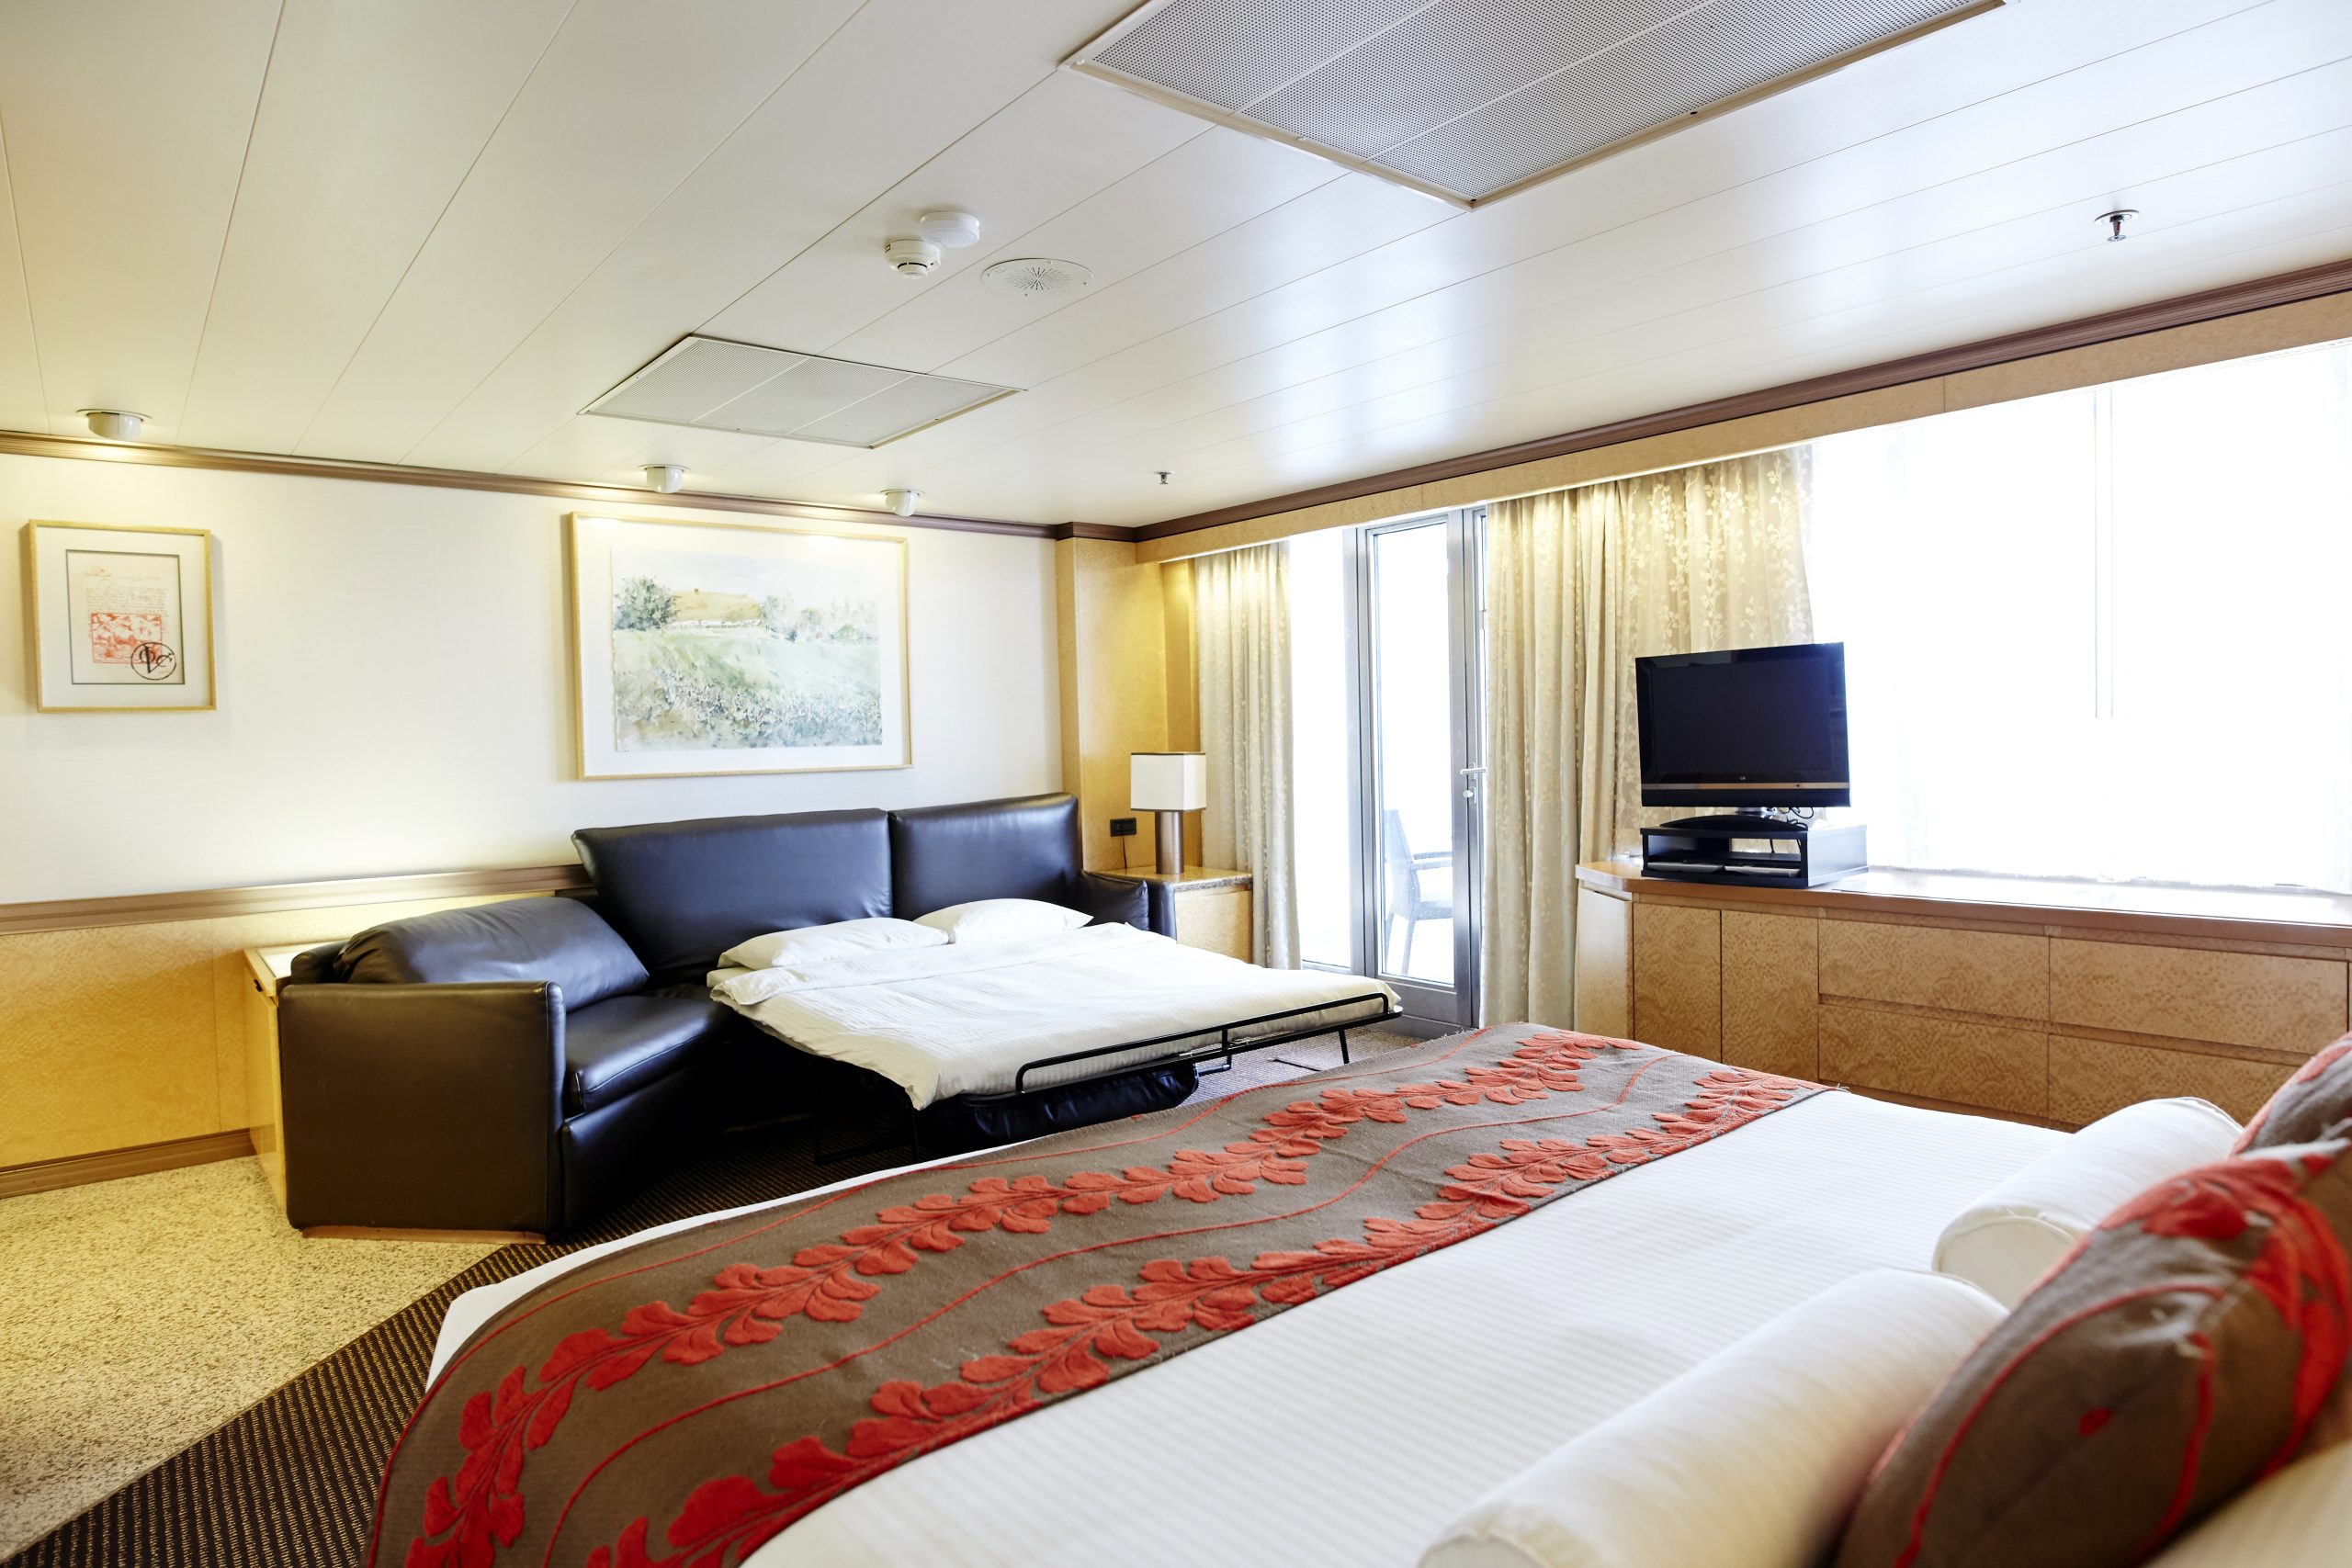 Journey_Ship_SG balcony deck 10 (double bed and double sofa bed)